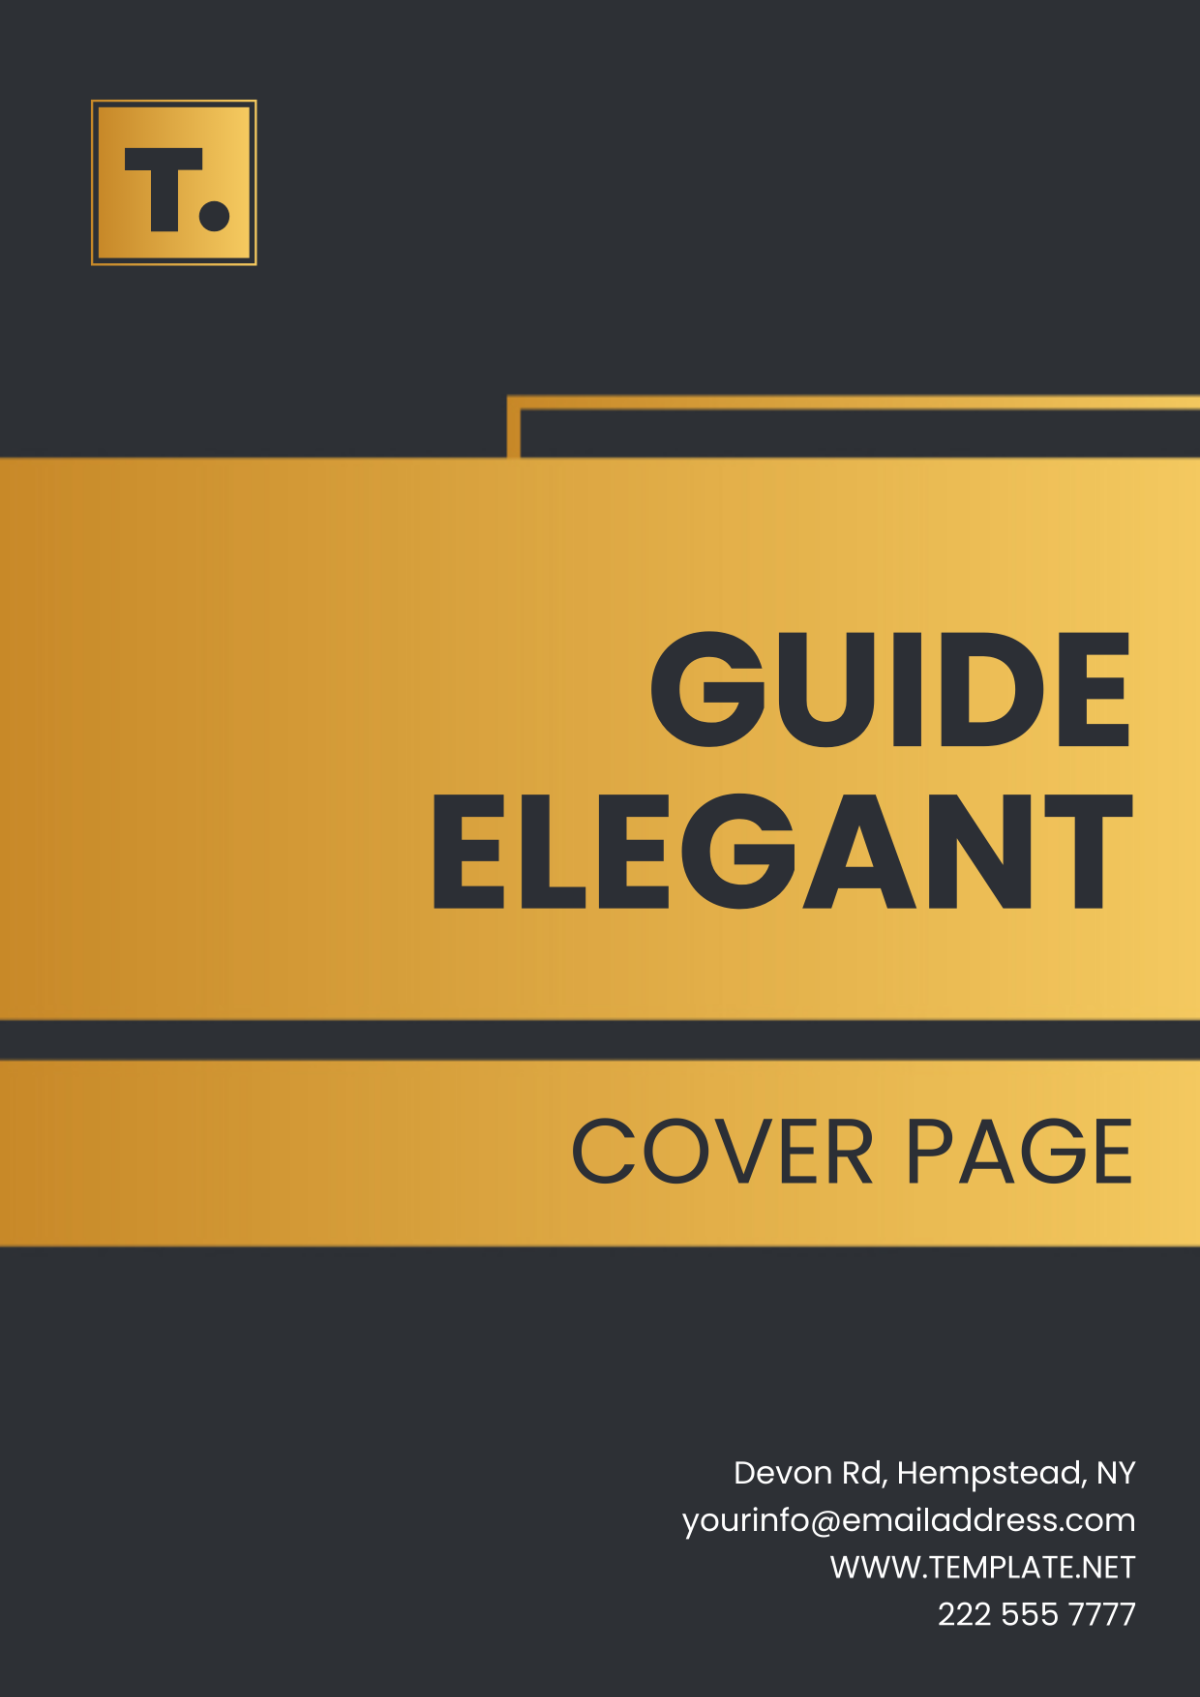 Guide Elegant Cover Page